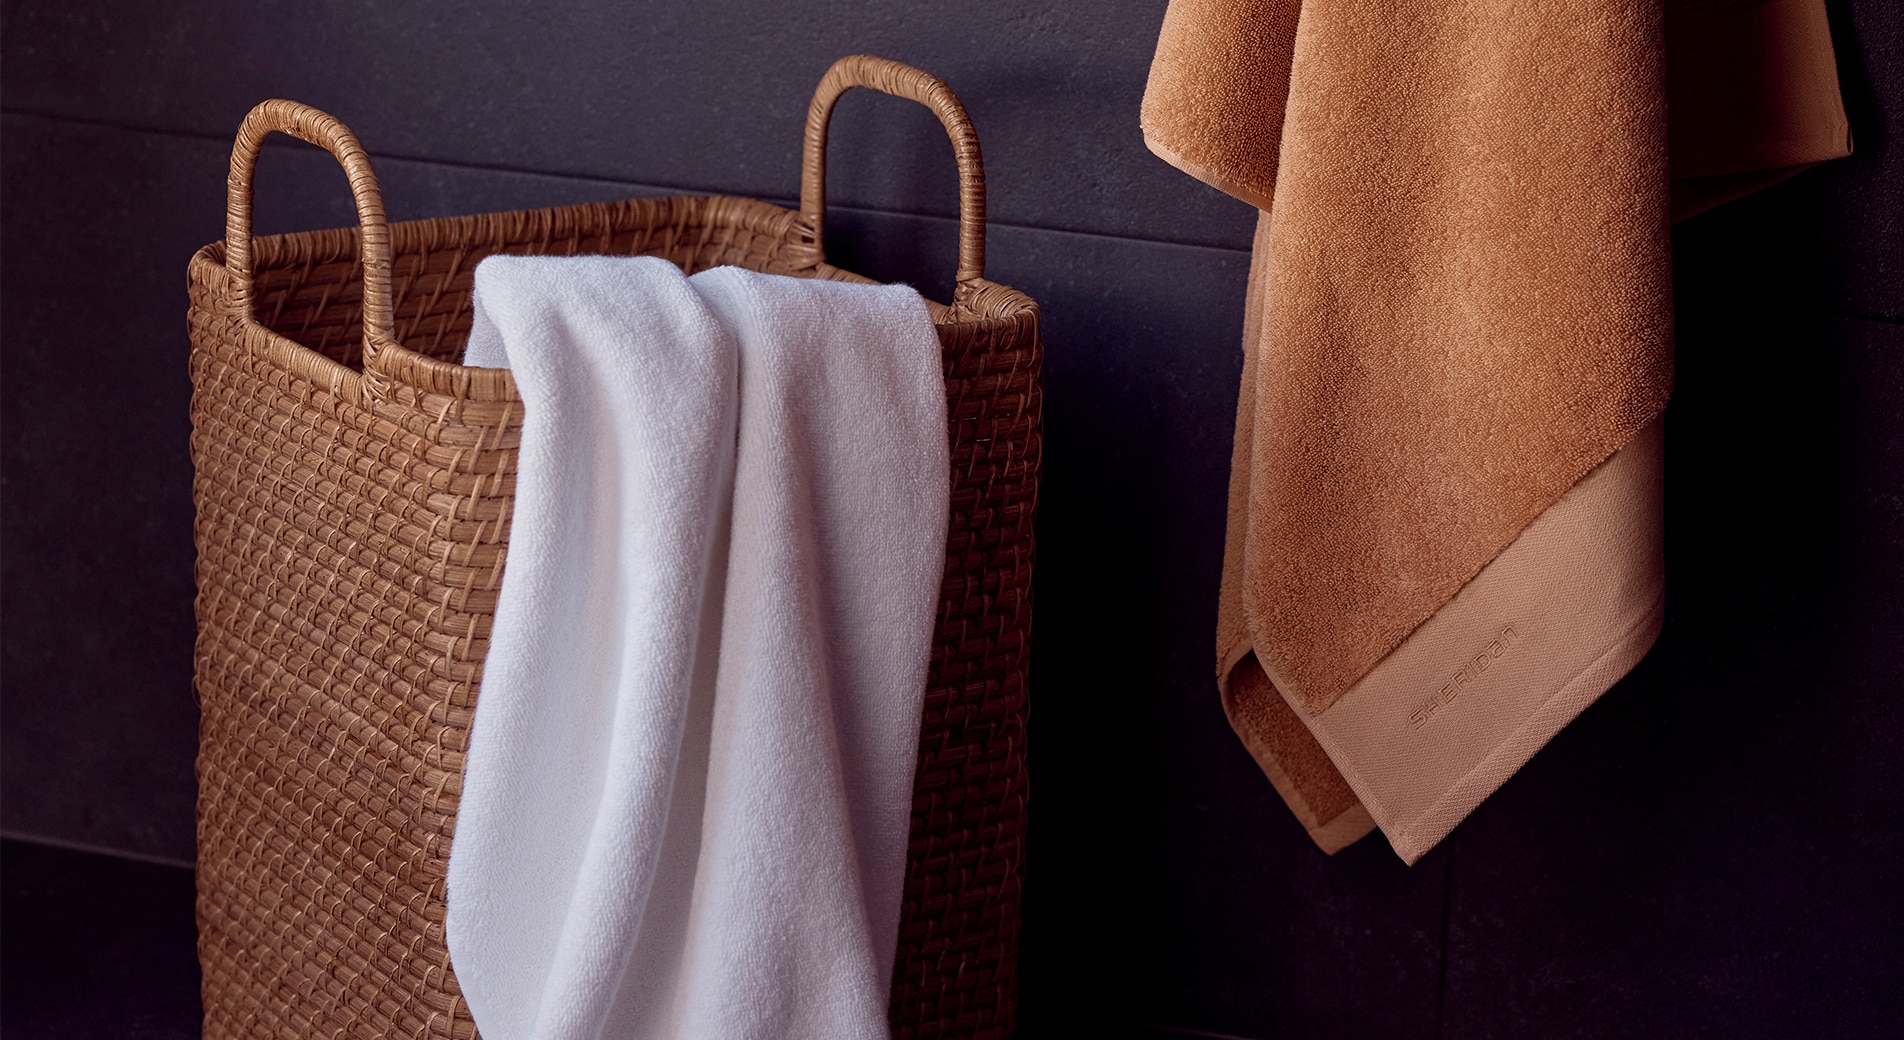 white towel in woven basket, orange towel hanging from wall.